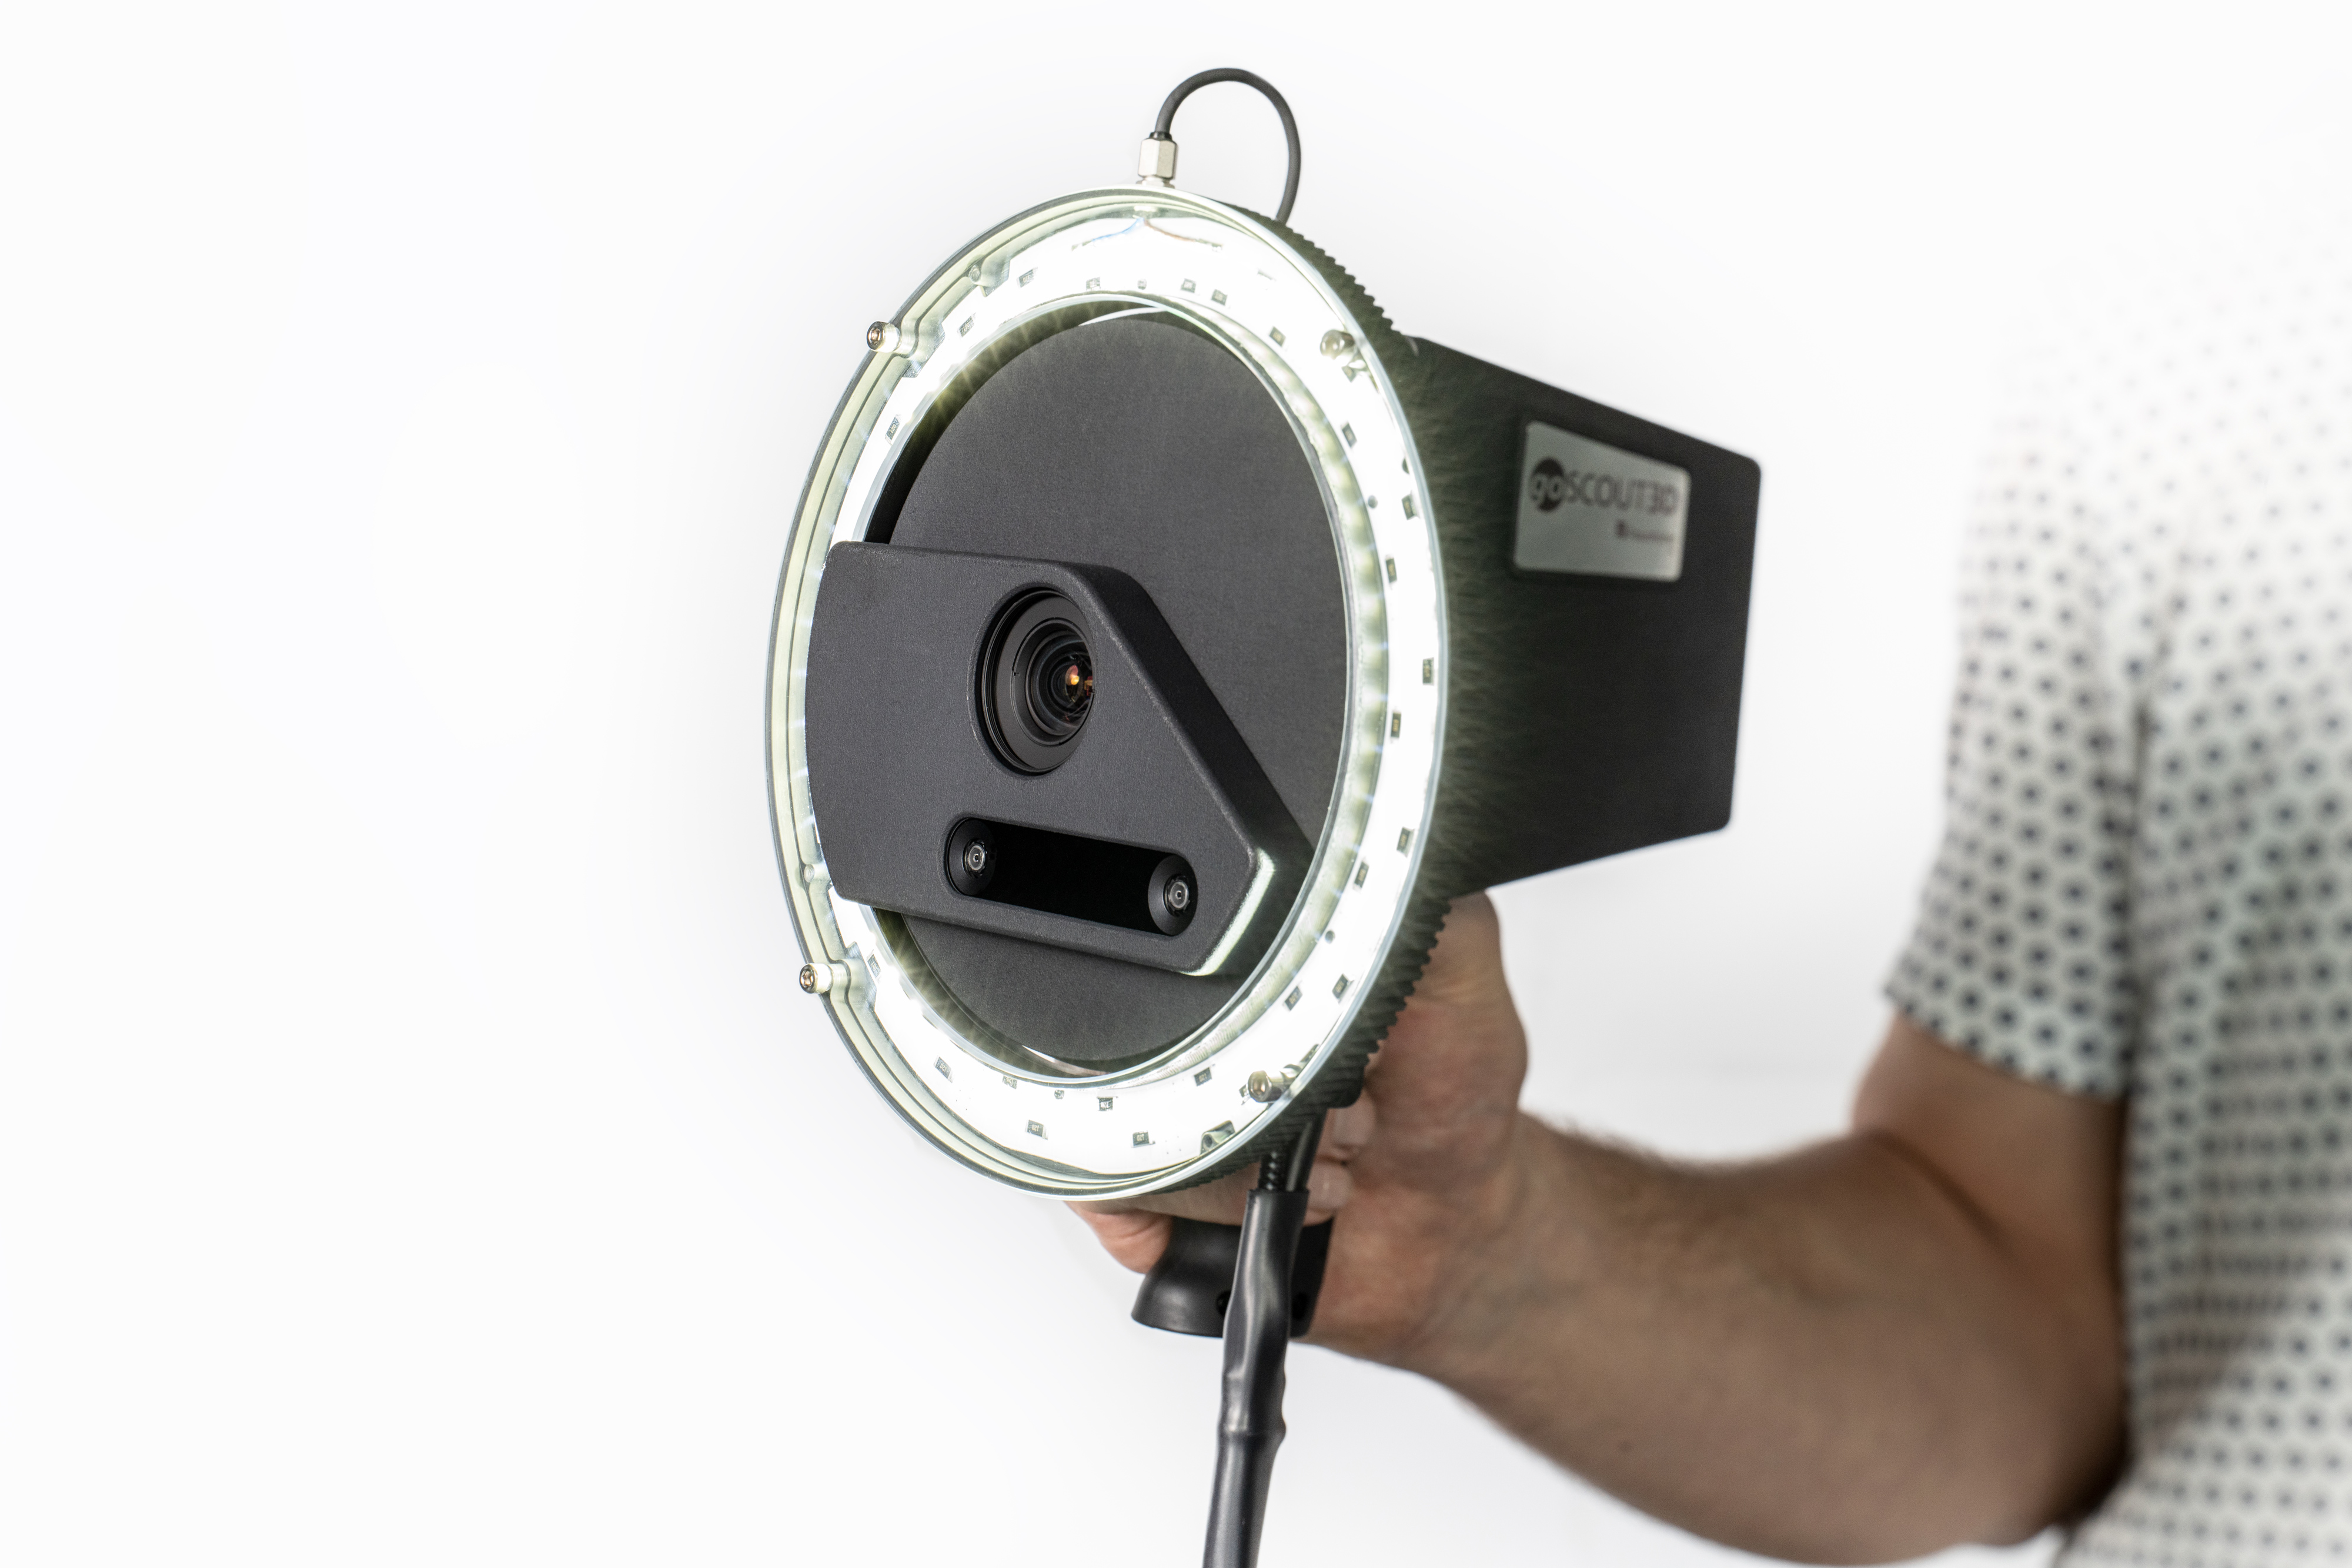 In addition to a high-resolution color camera as well as an inertial measurement unit and a display with touchscreen, a ring light is the most visually striking feature of the new sensor